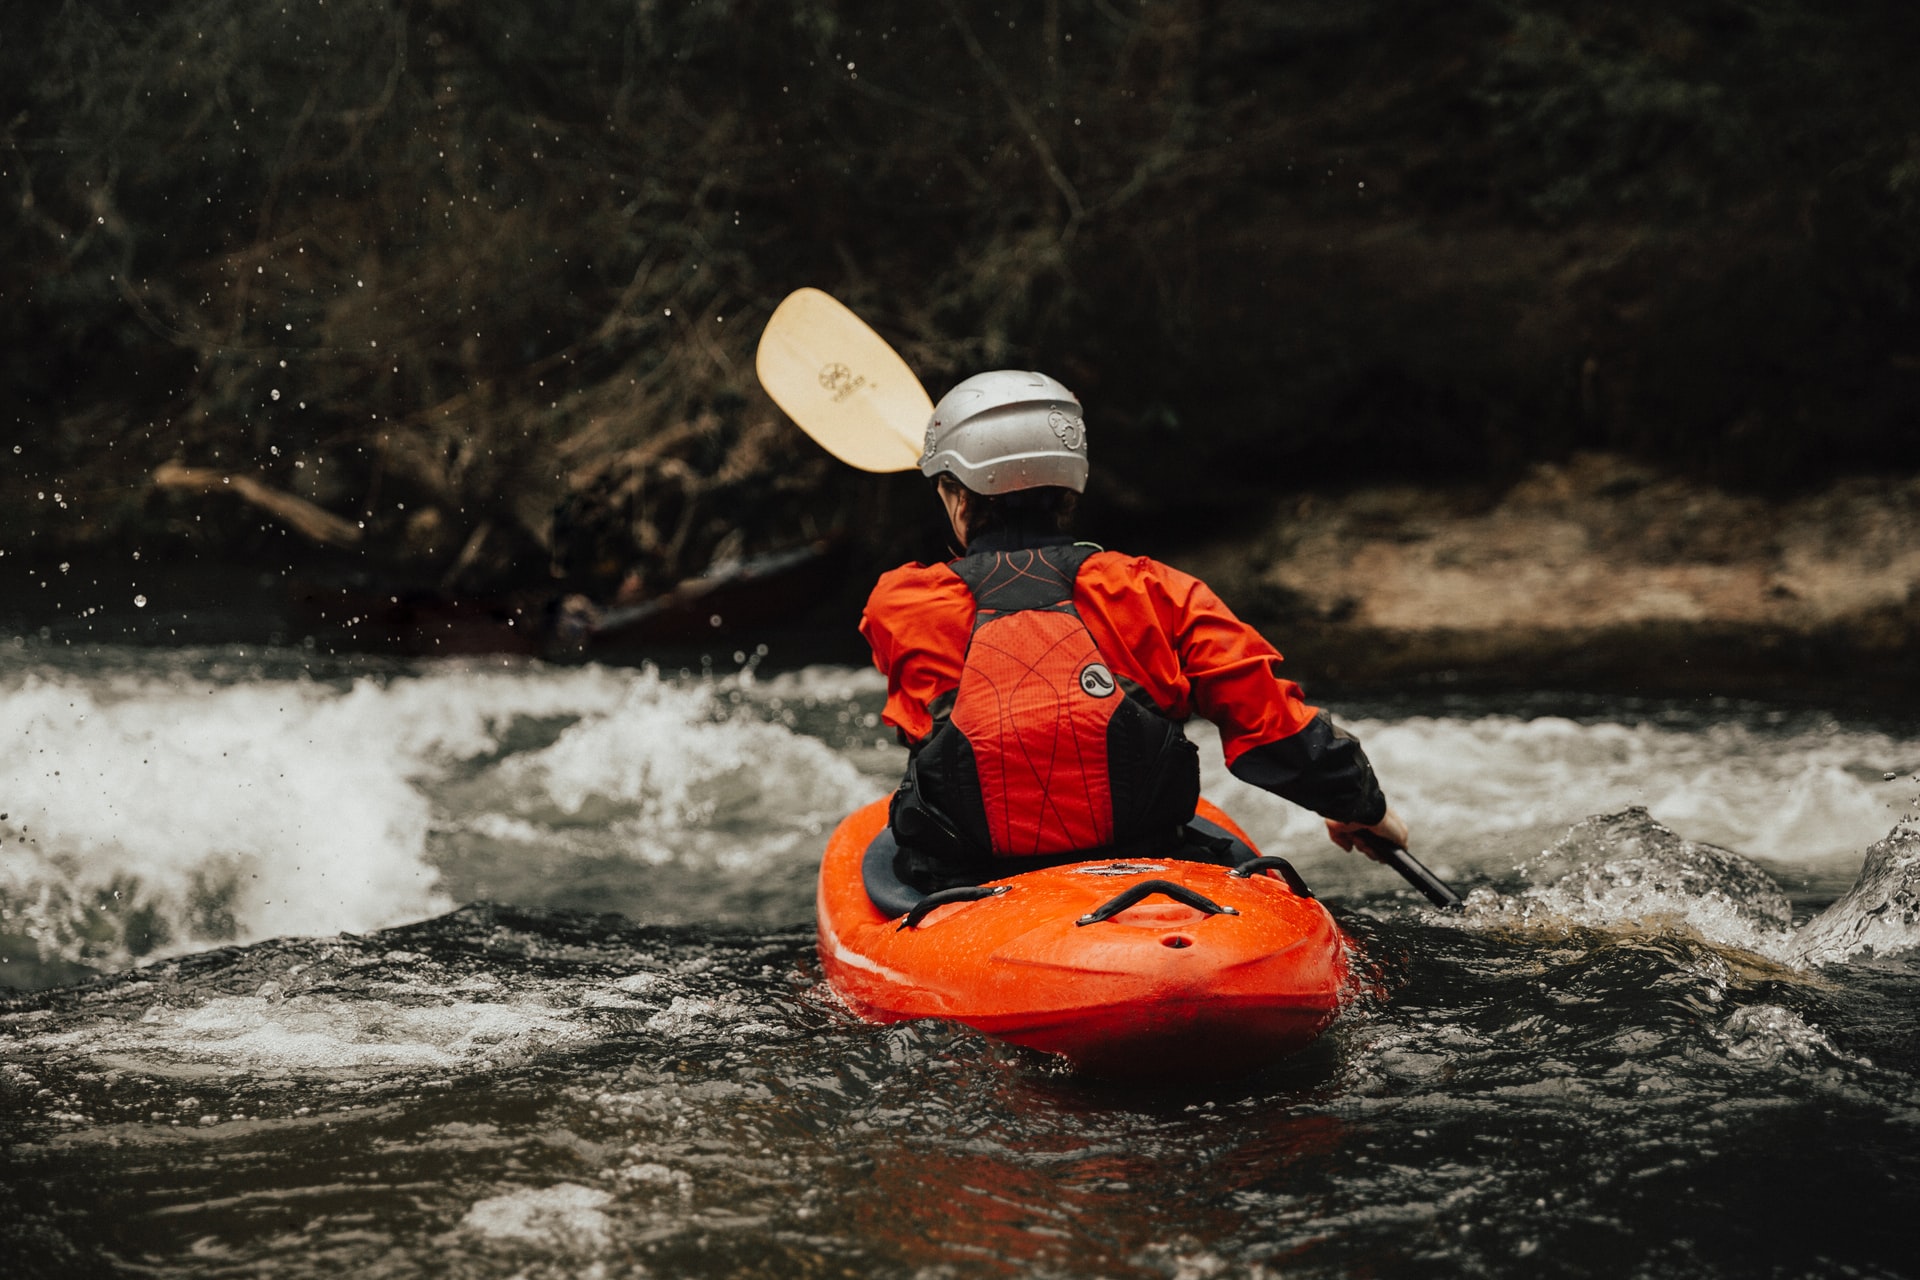 15 Best Whitewater Kayaking Destinations in the U.S.